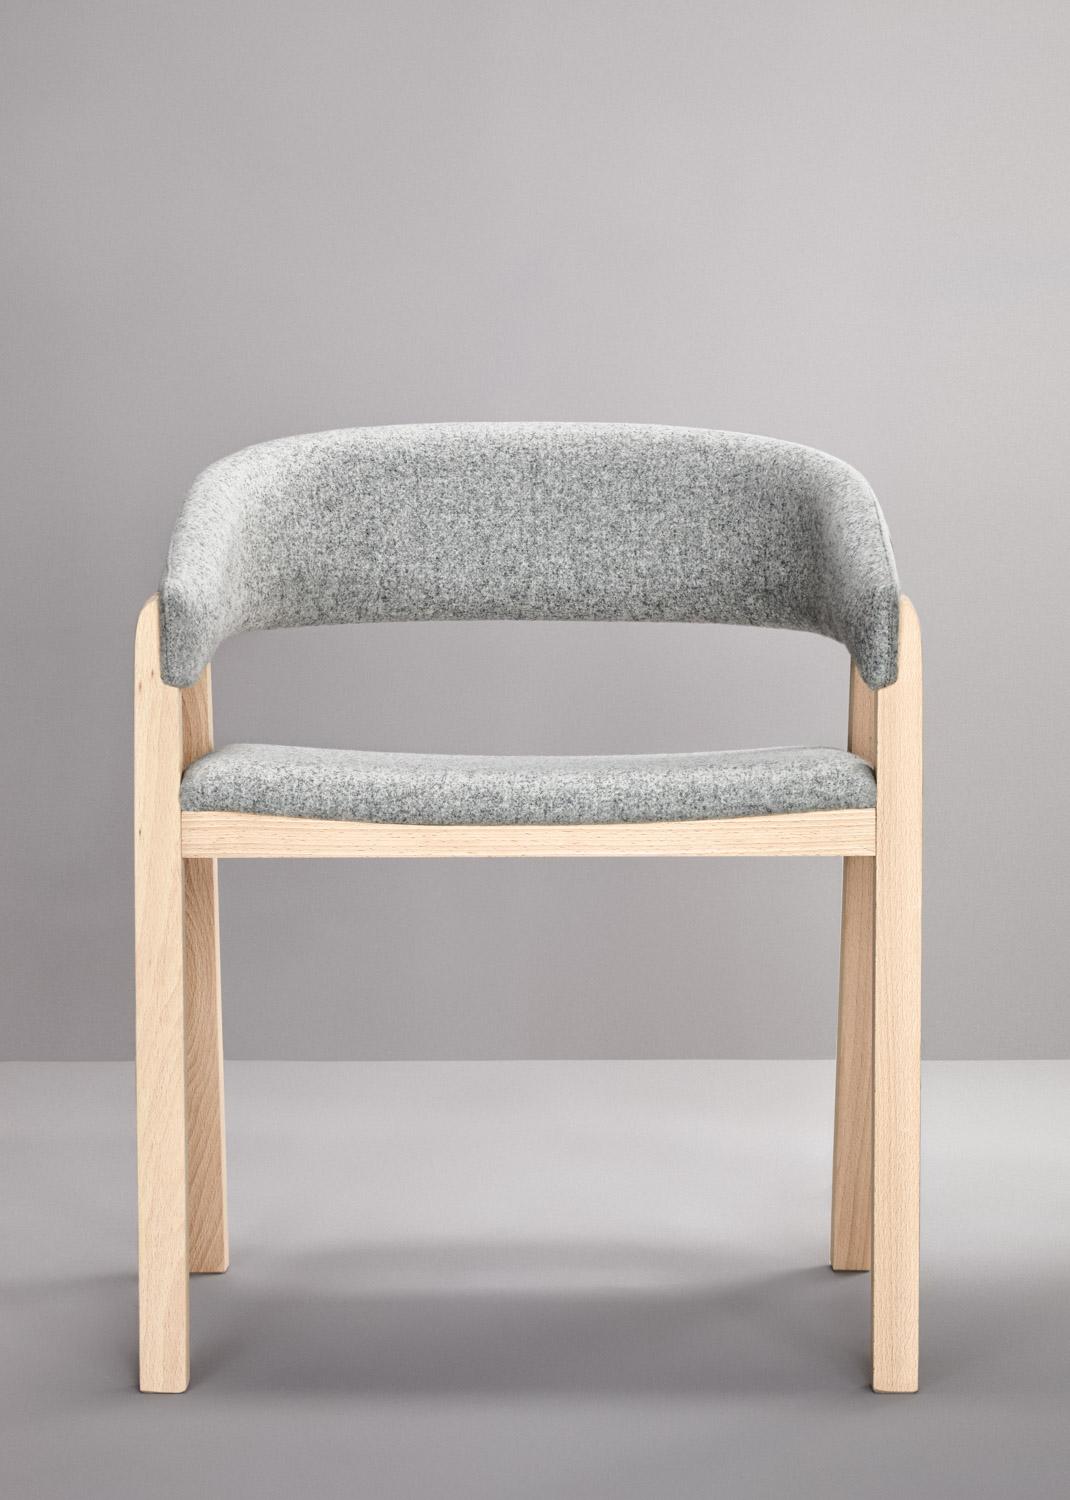 Oslo chair - grey by Pepe Albargues.
Dimensions: W59, D50, H75, Seat 46.
Materials: Beech wood structure.
Foam CMHR (high resilience and flame retardant) for all our cushion filling systems.

Also available: Variations of materials and